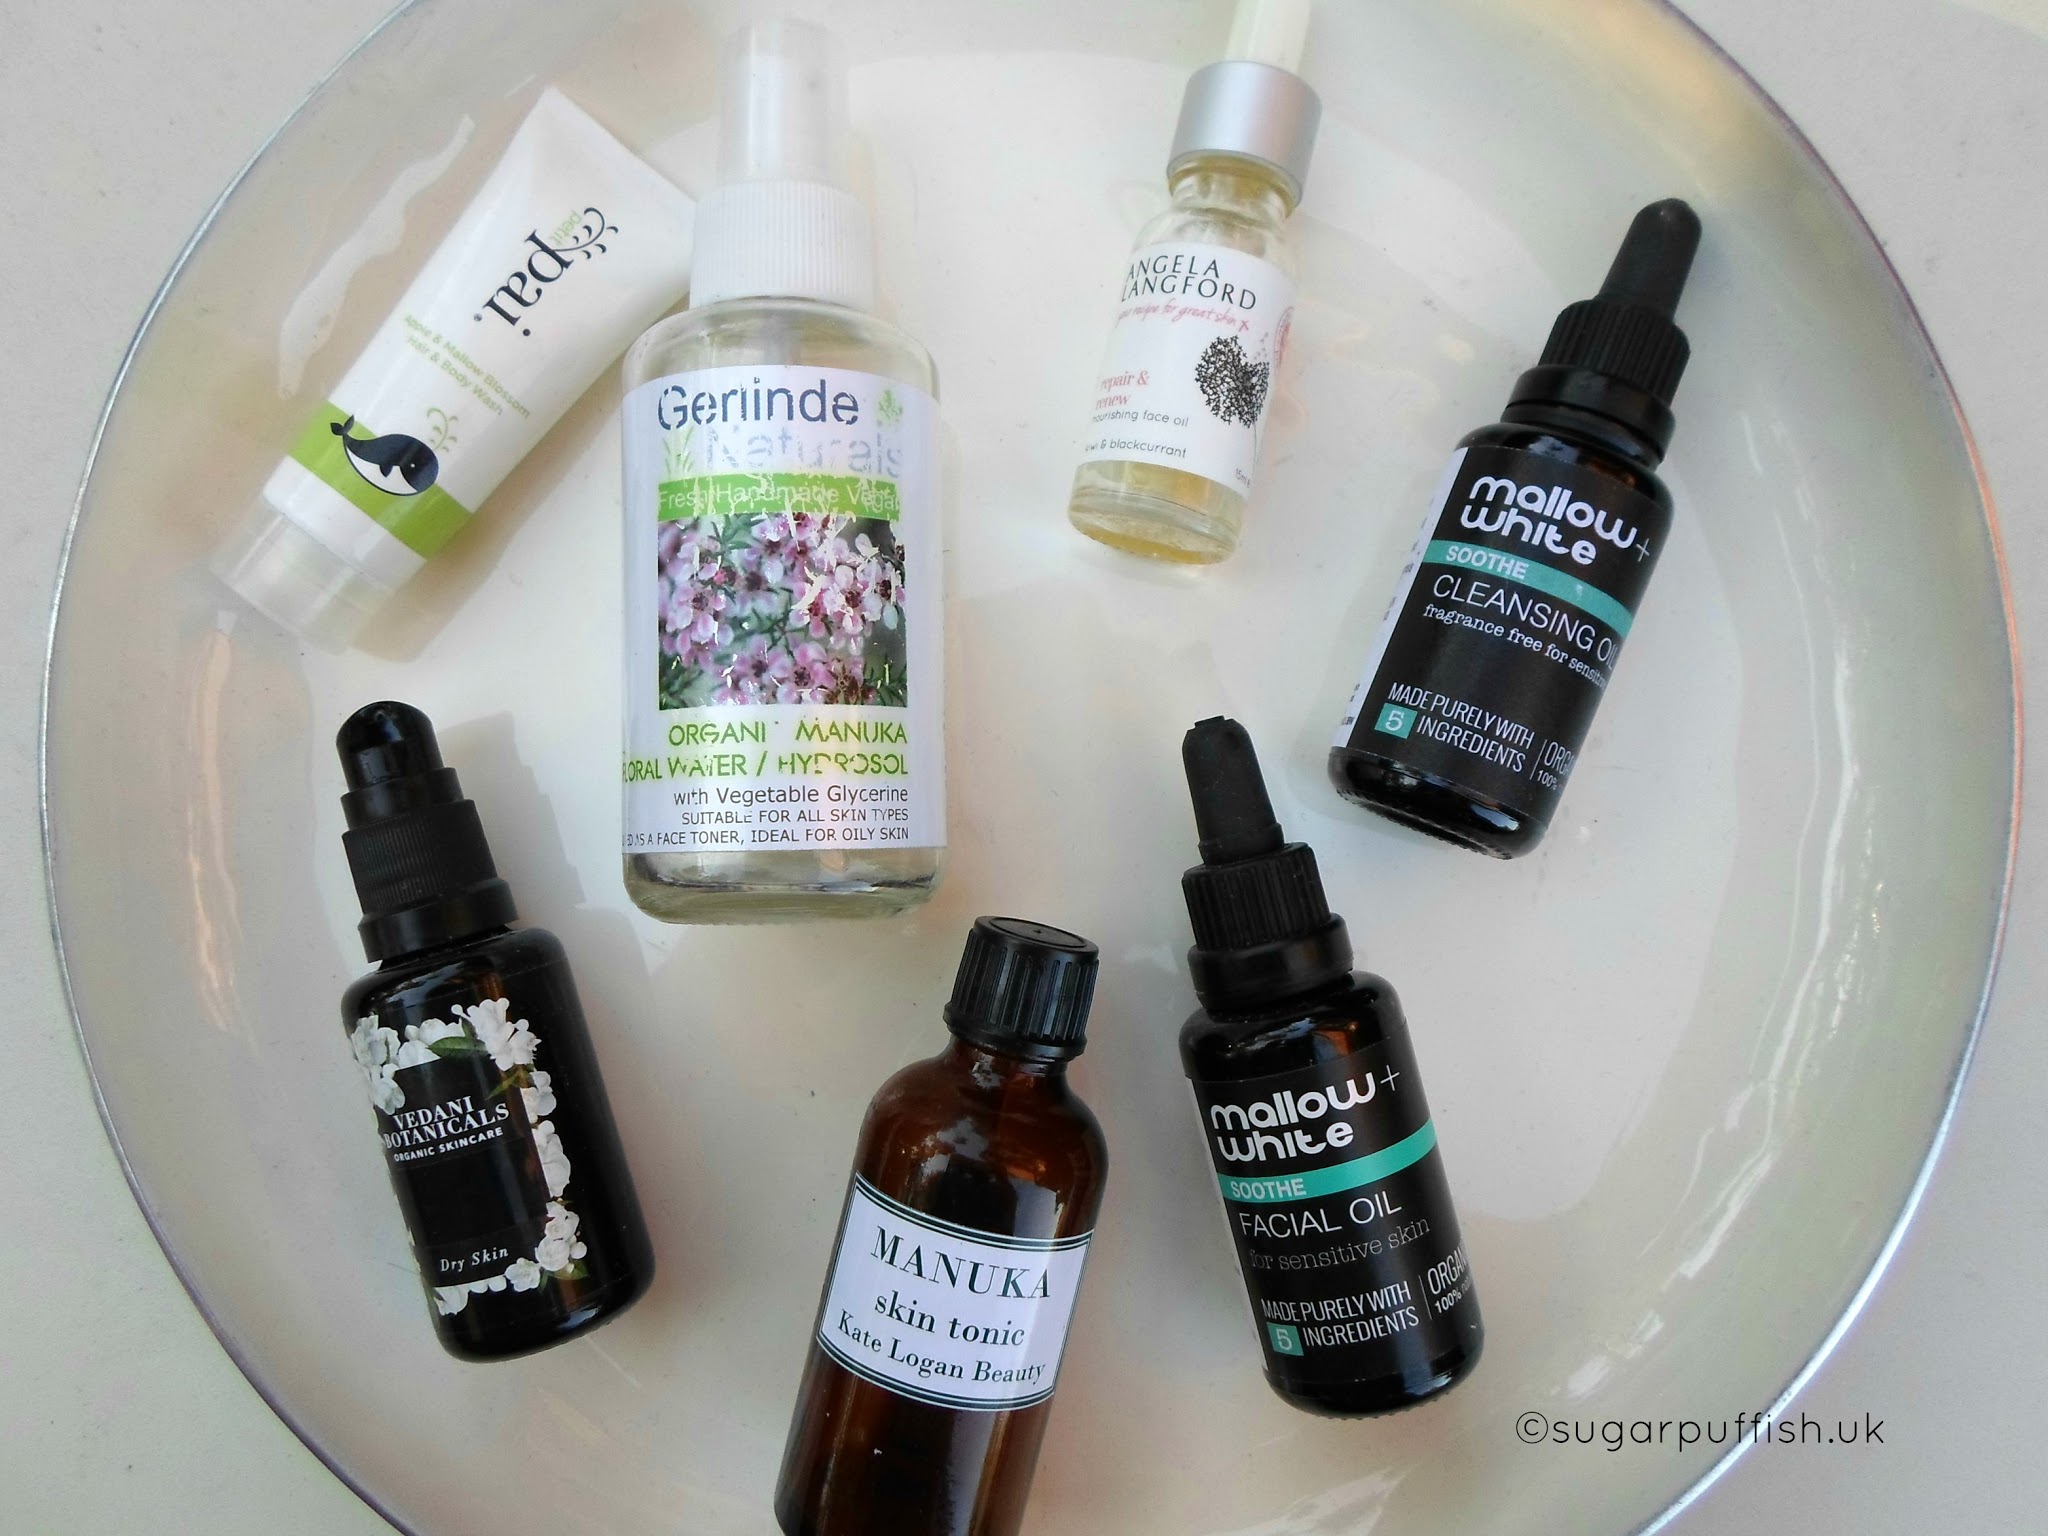 August Empties featuring Gerlinde Natural, Mallow & White and Angela Langford